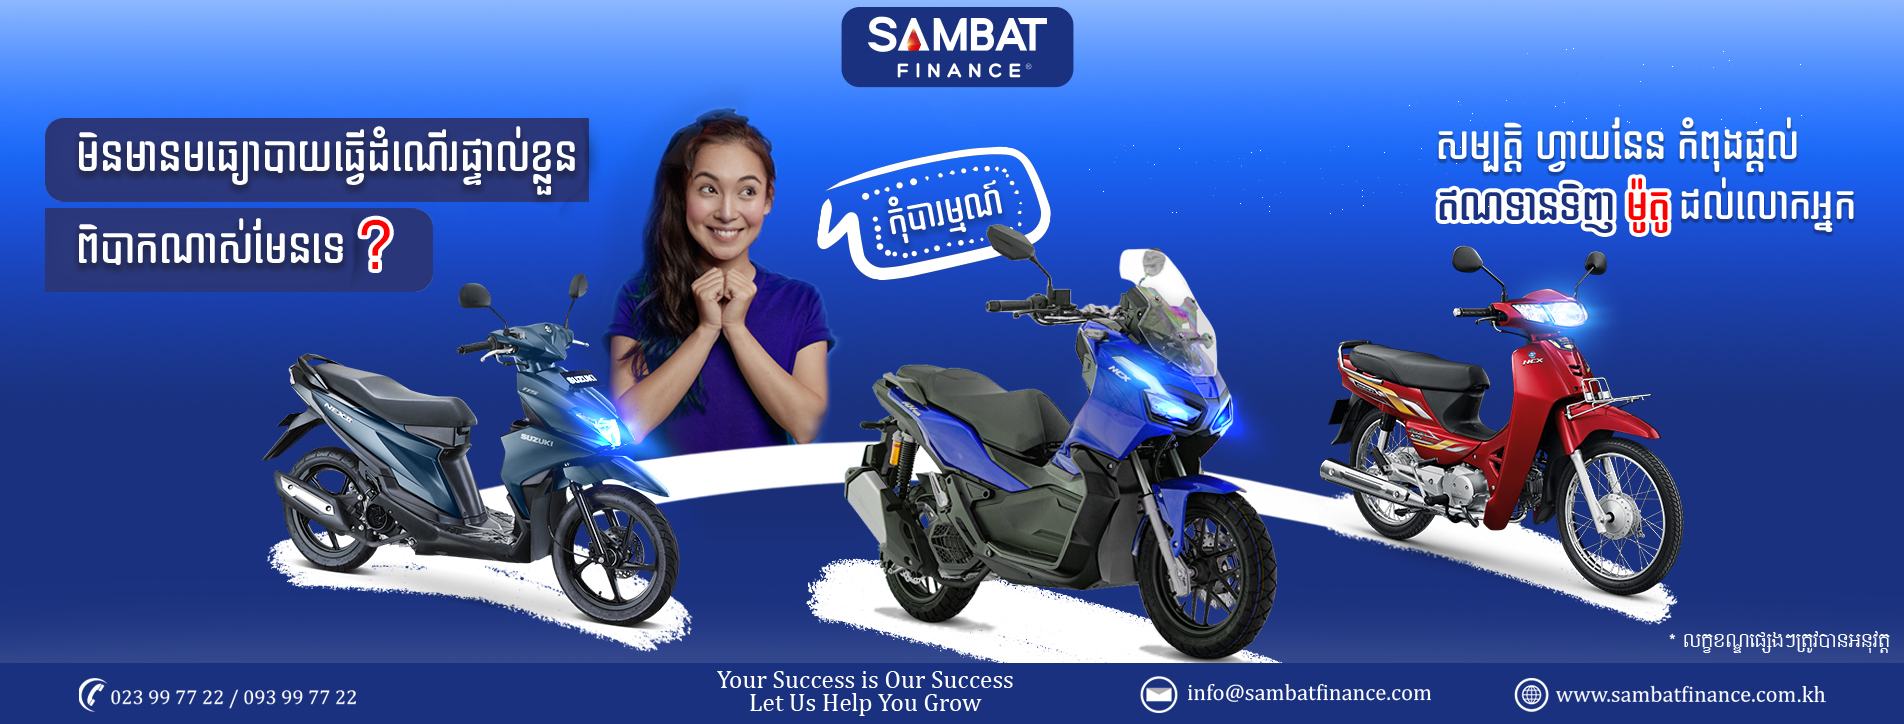 Contact SAMBAT Finance to get a motorcycle loan immediately.